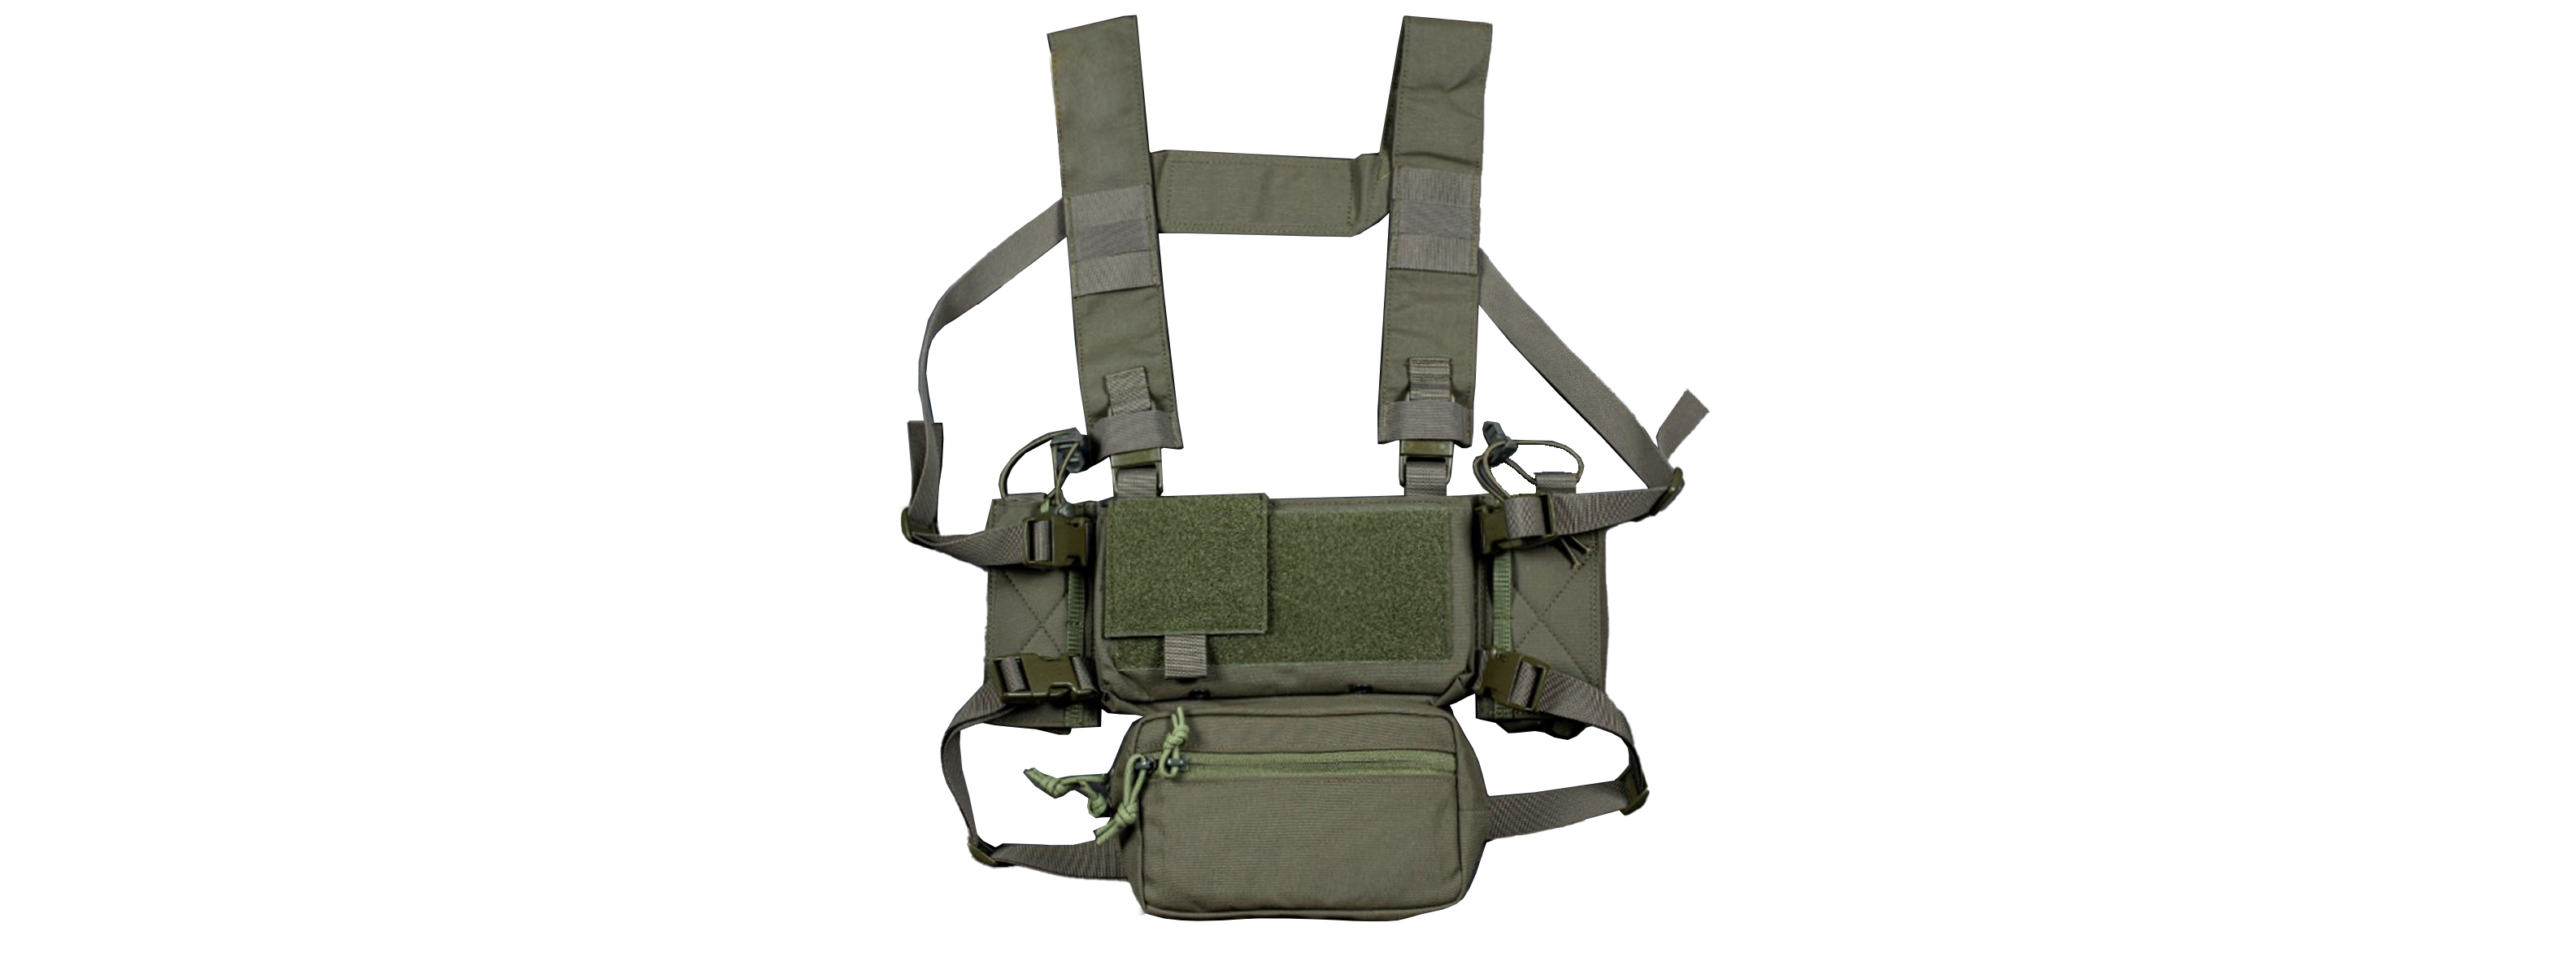 MK4 Tactical Chest Rig Carrier - (OD Green)